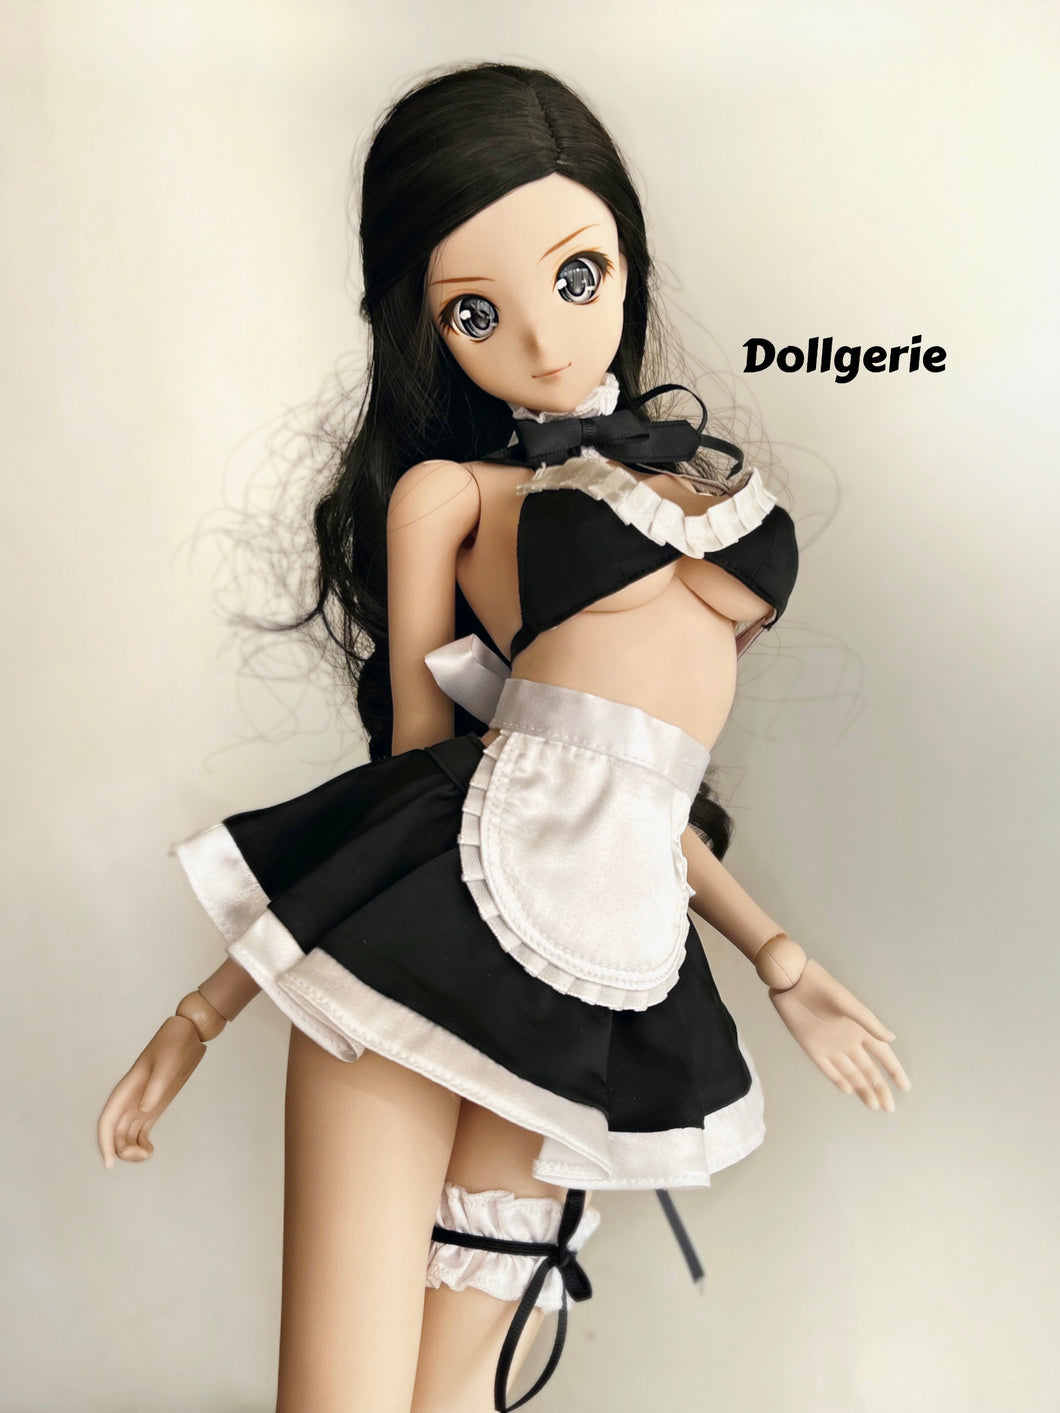 2021 Final Smexy Maid Costume for SmartDoll or DD